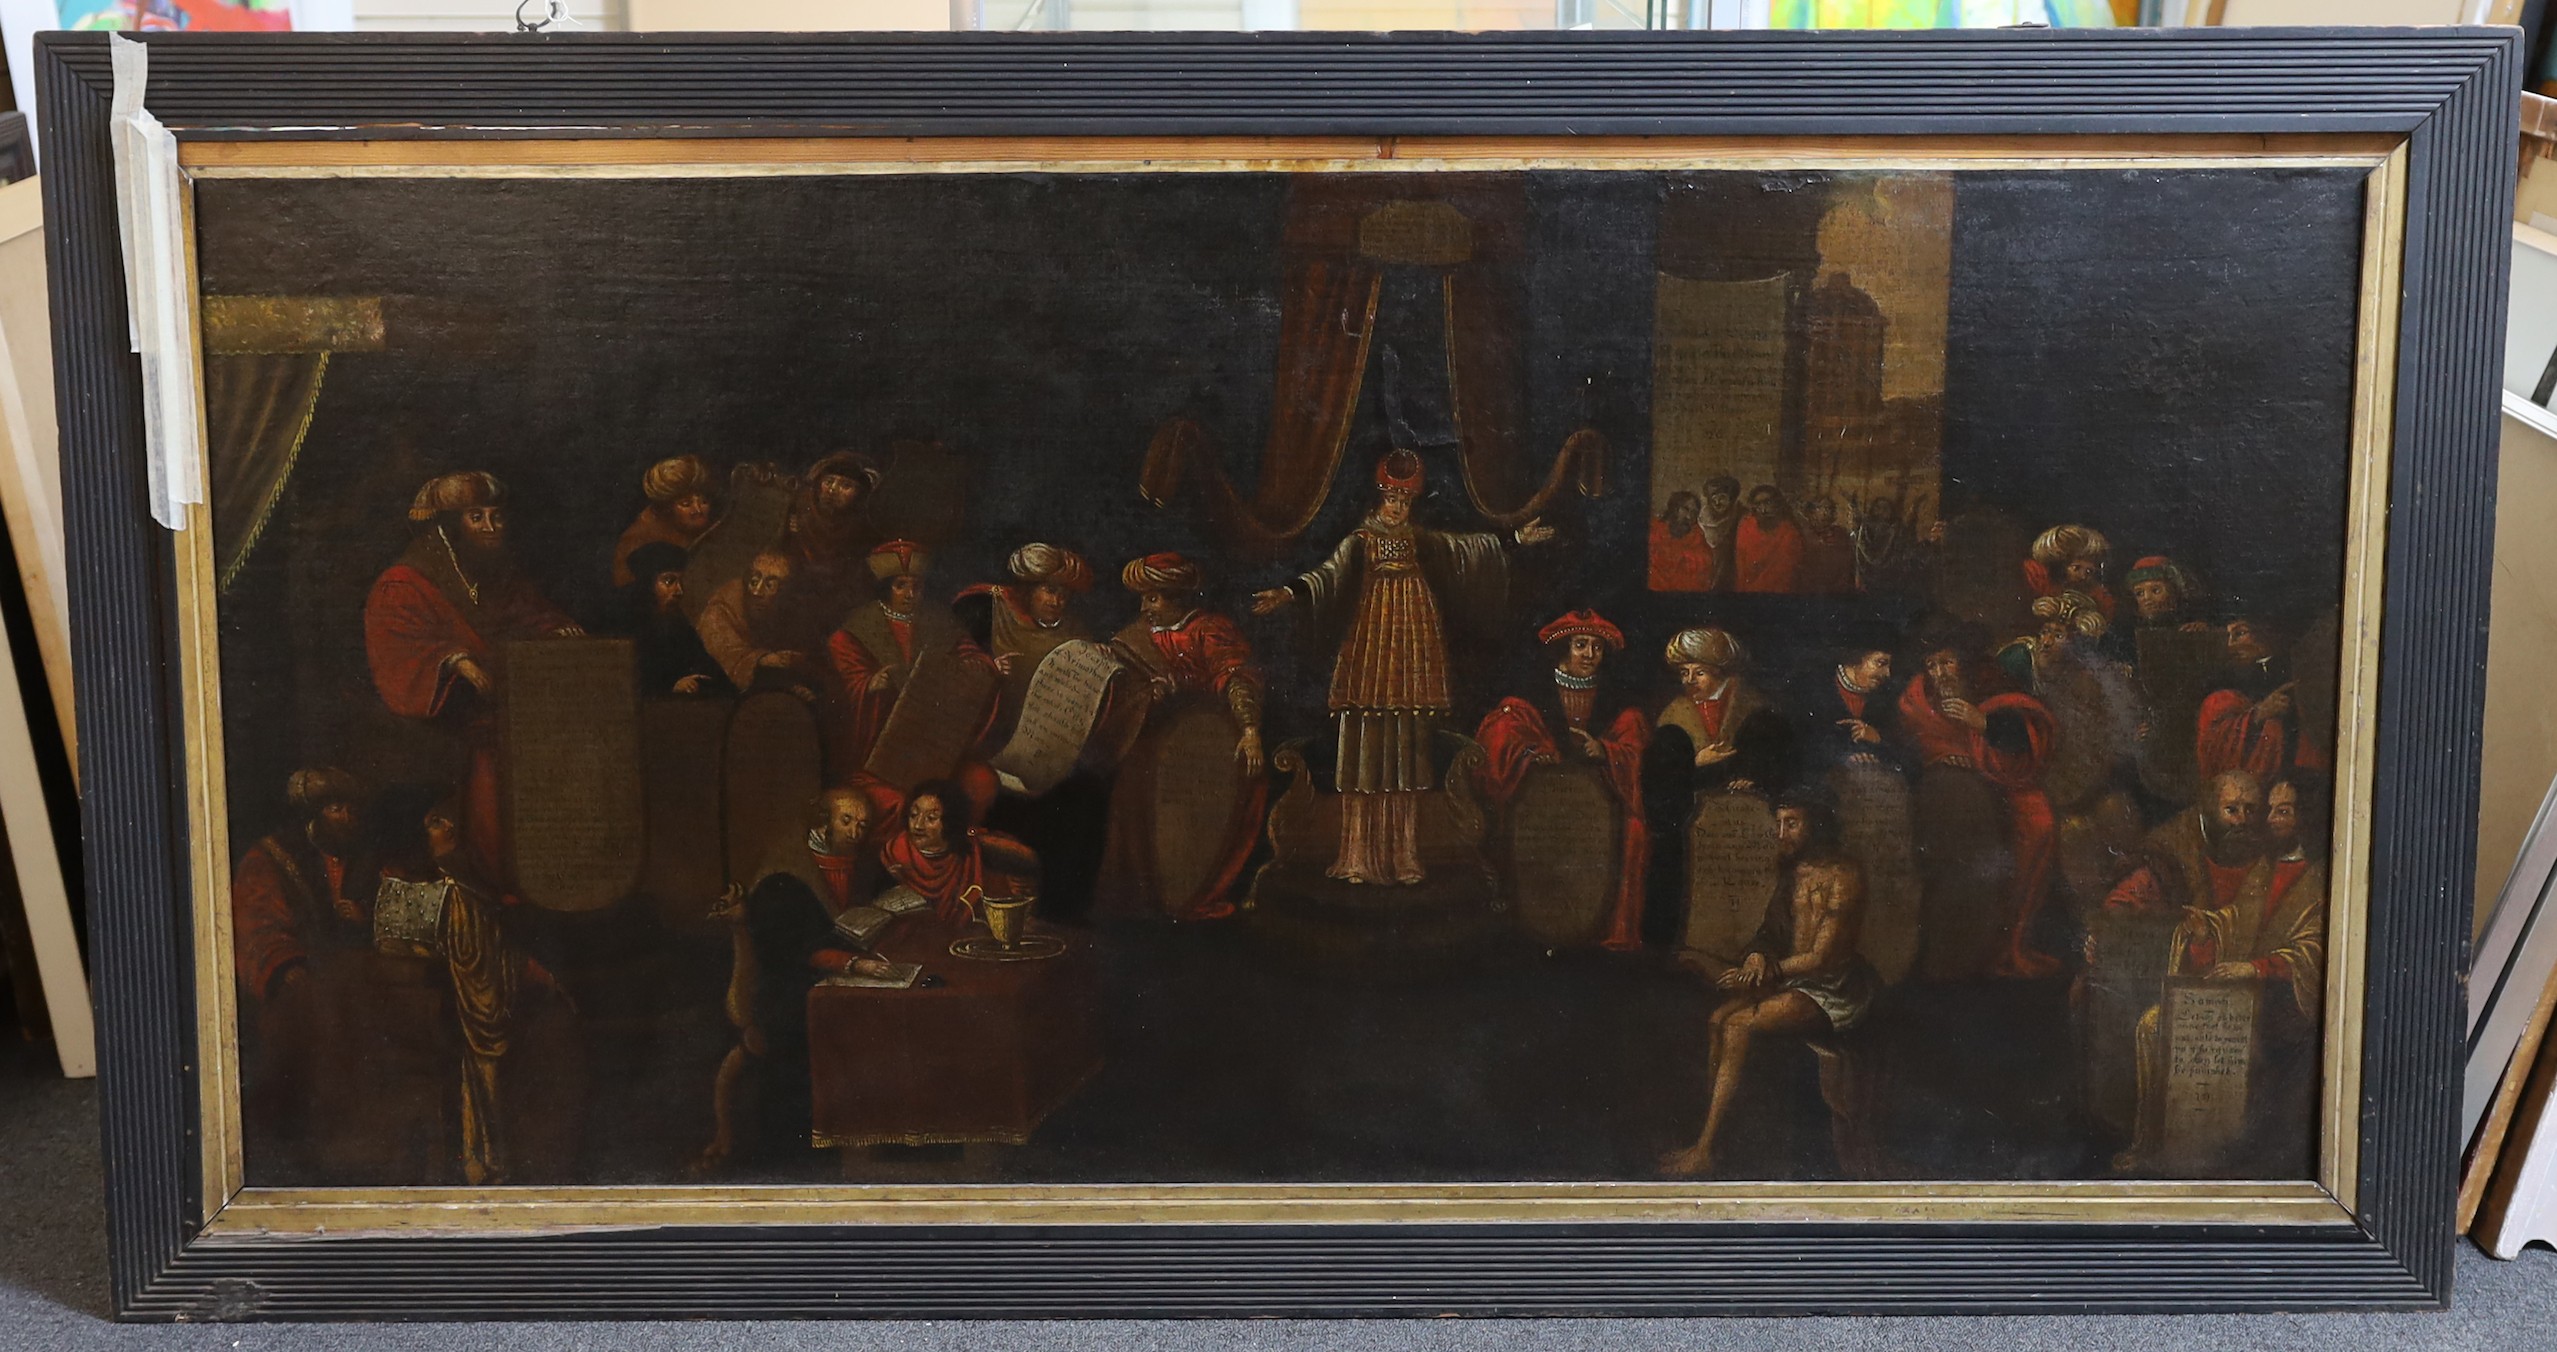 Mid 17th Century English School, Christ before Pilate and Jewish leaders, including Joseph of Arimathea, with many of the figures holding scrolls on which are writings inscribed in both Hebrew and English., oil on canvas